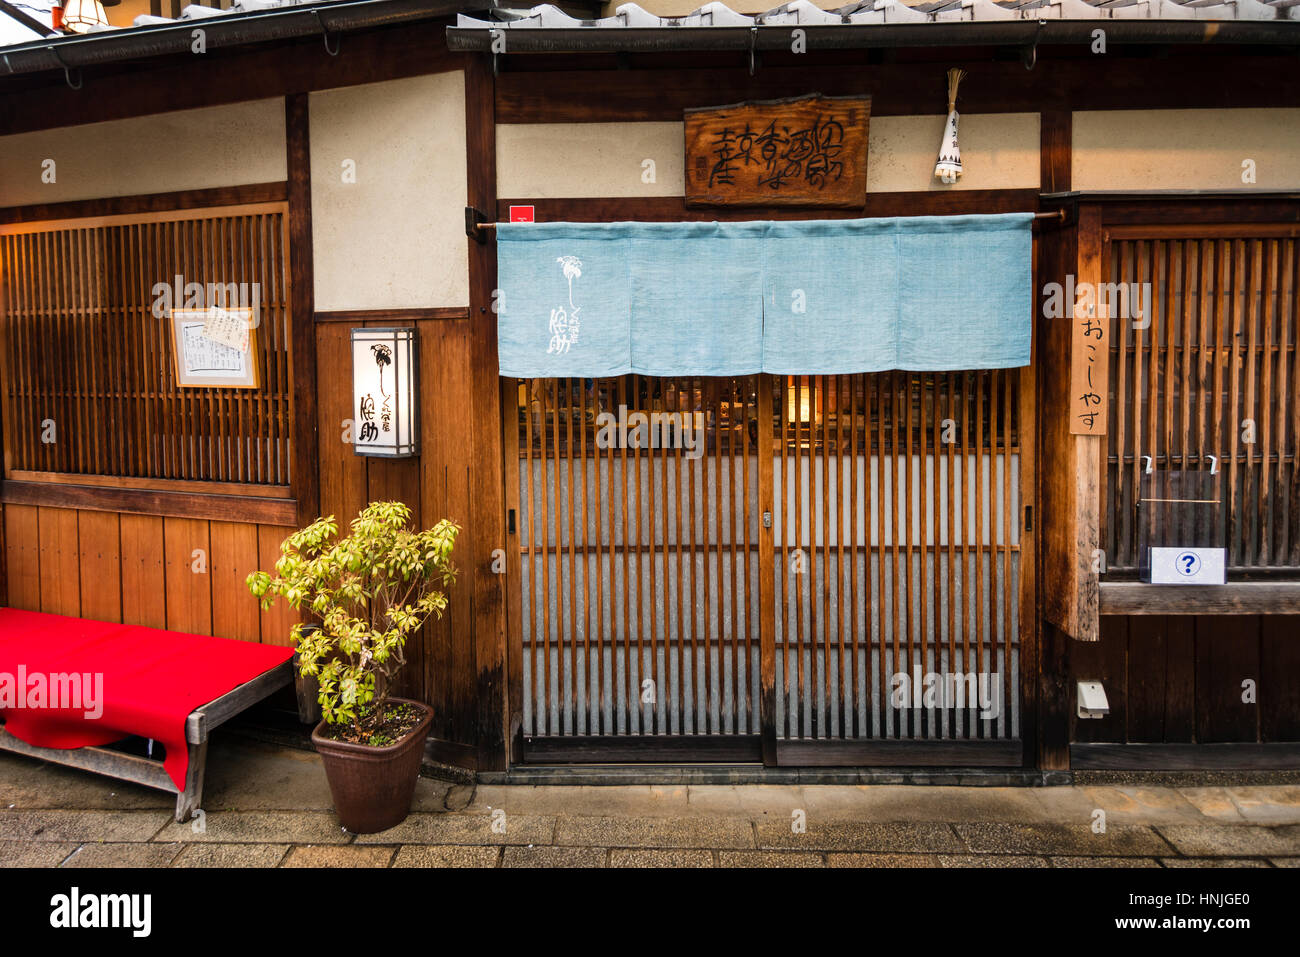 Frontage of a Japanese restaurant, Gion District, Kyoto, Japan Stock Photo